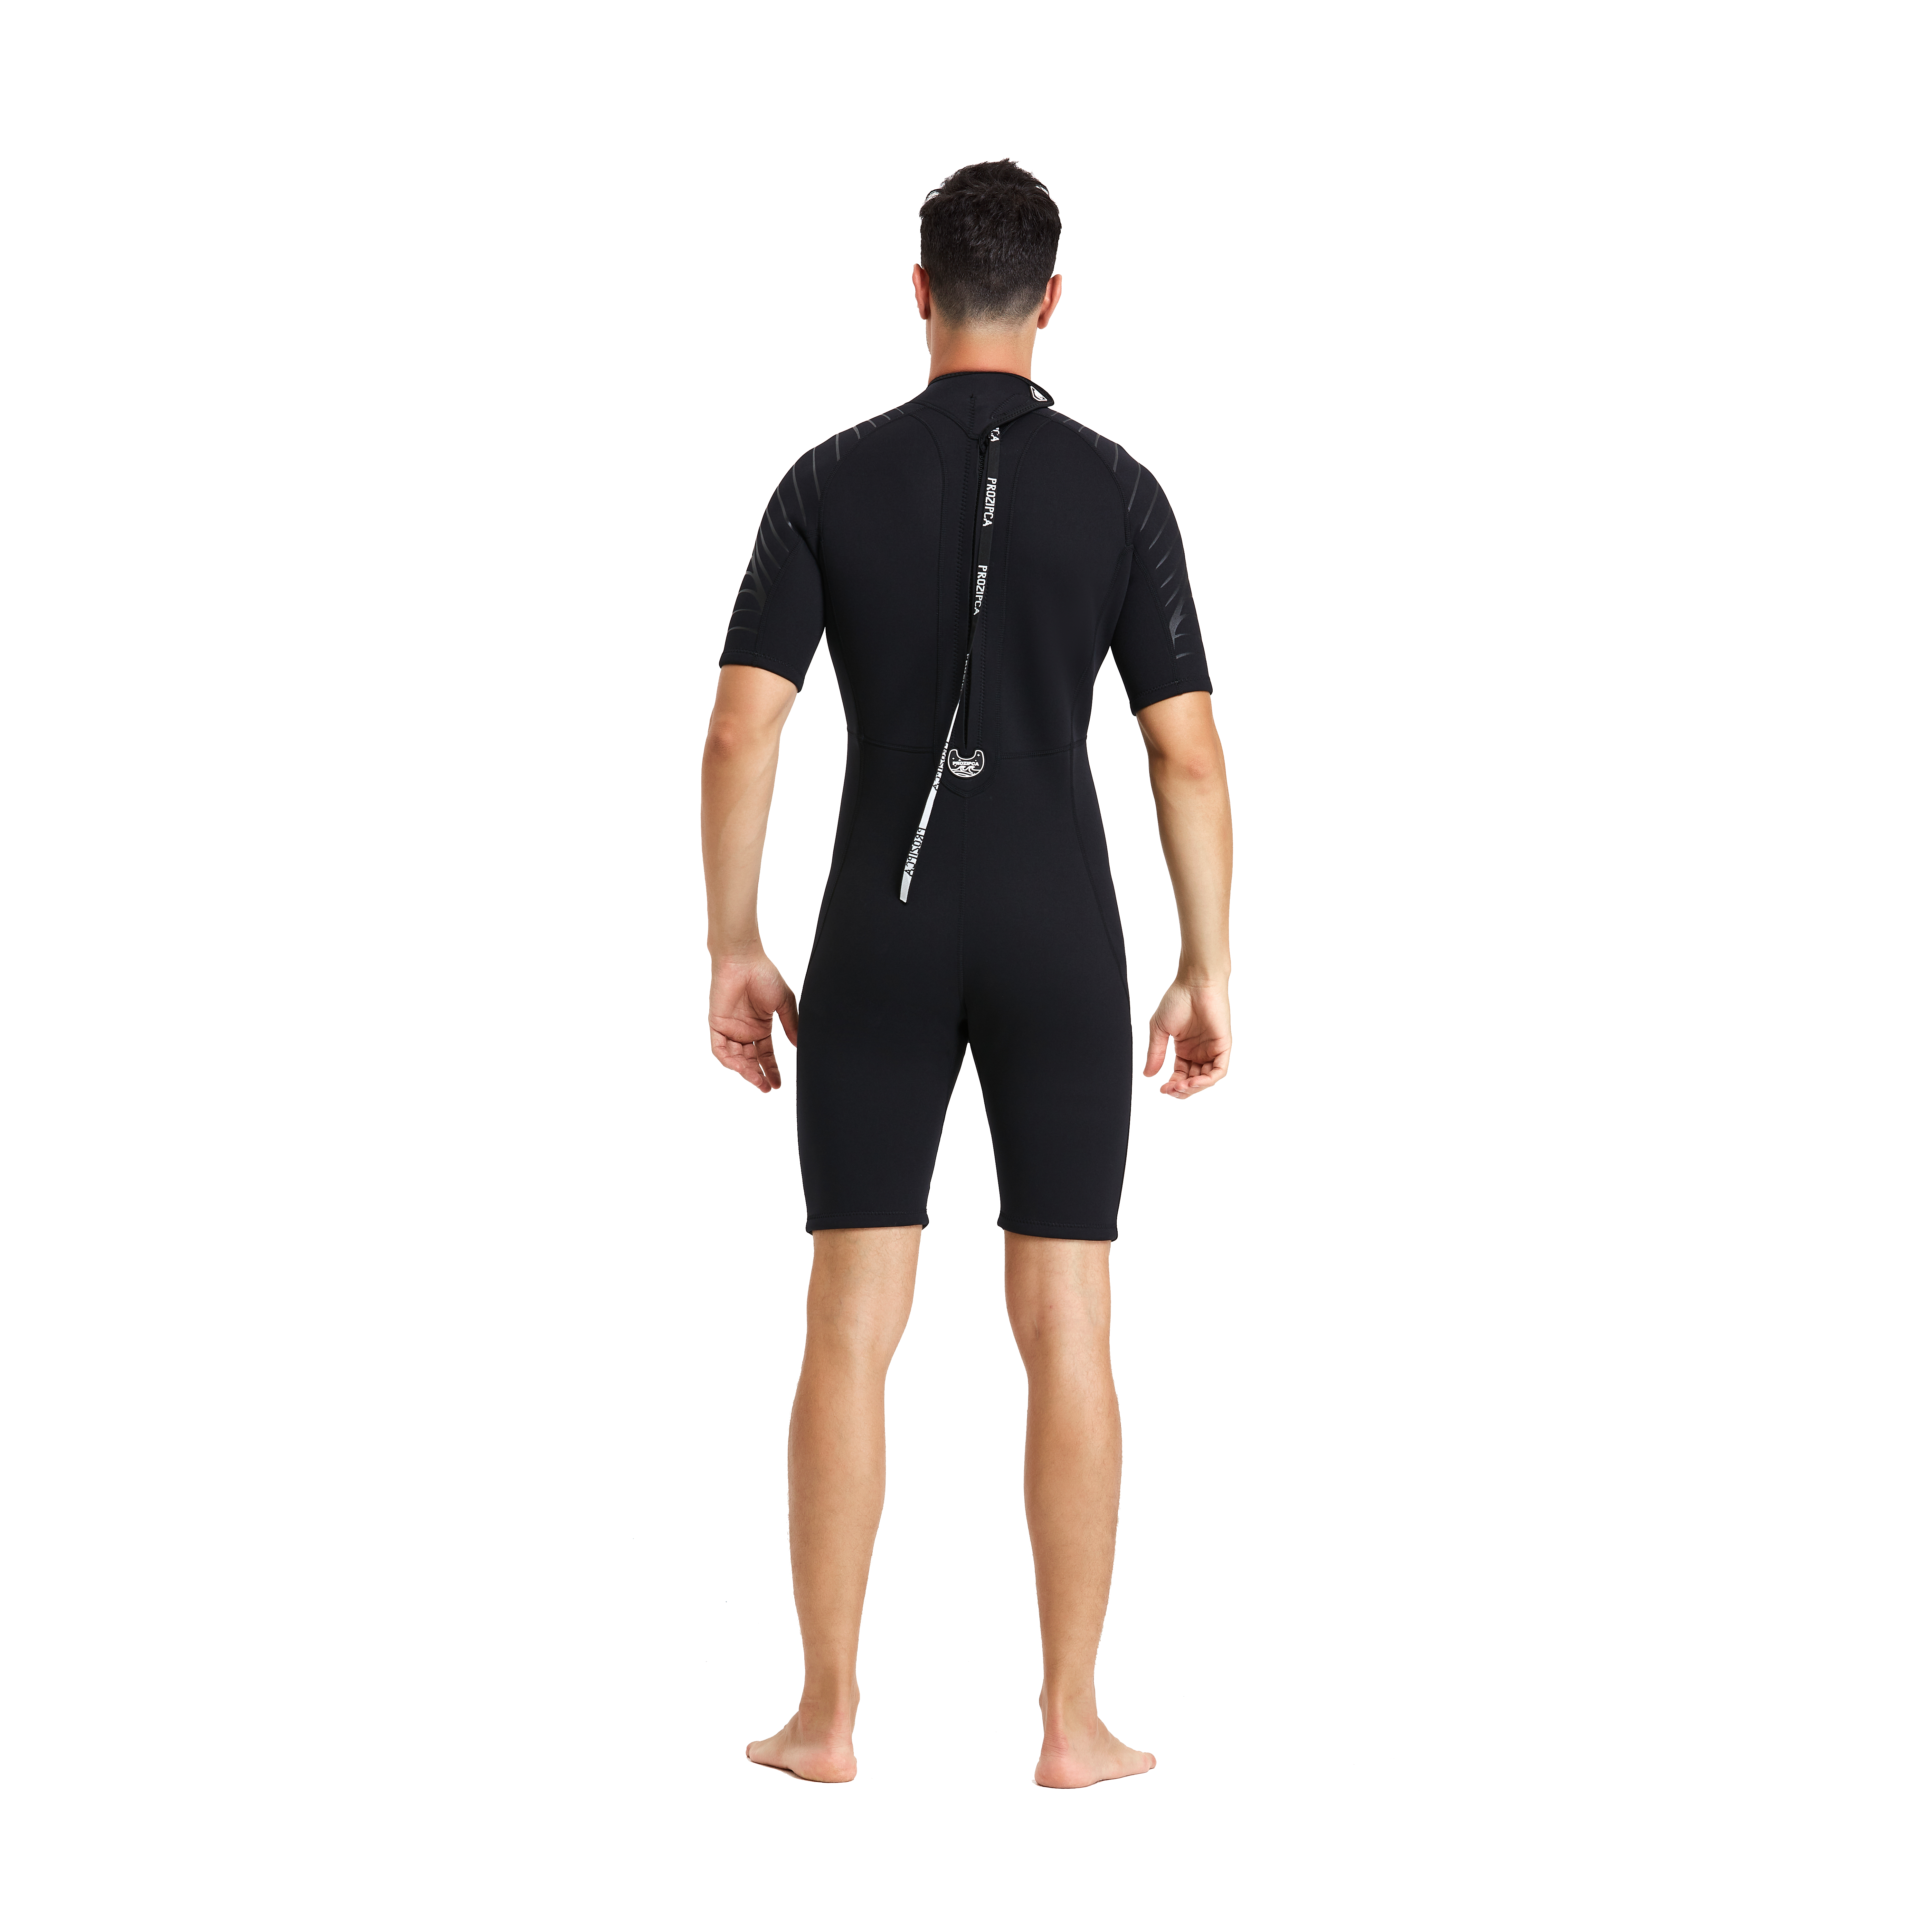 Customized Wetsuits Shorty Full Body Long Sleeve Swinsuits Neoprene Fabric 3Mm Mens Wet Snorkeling Surf Suit